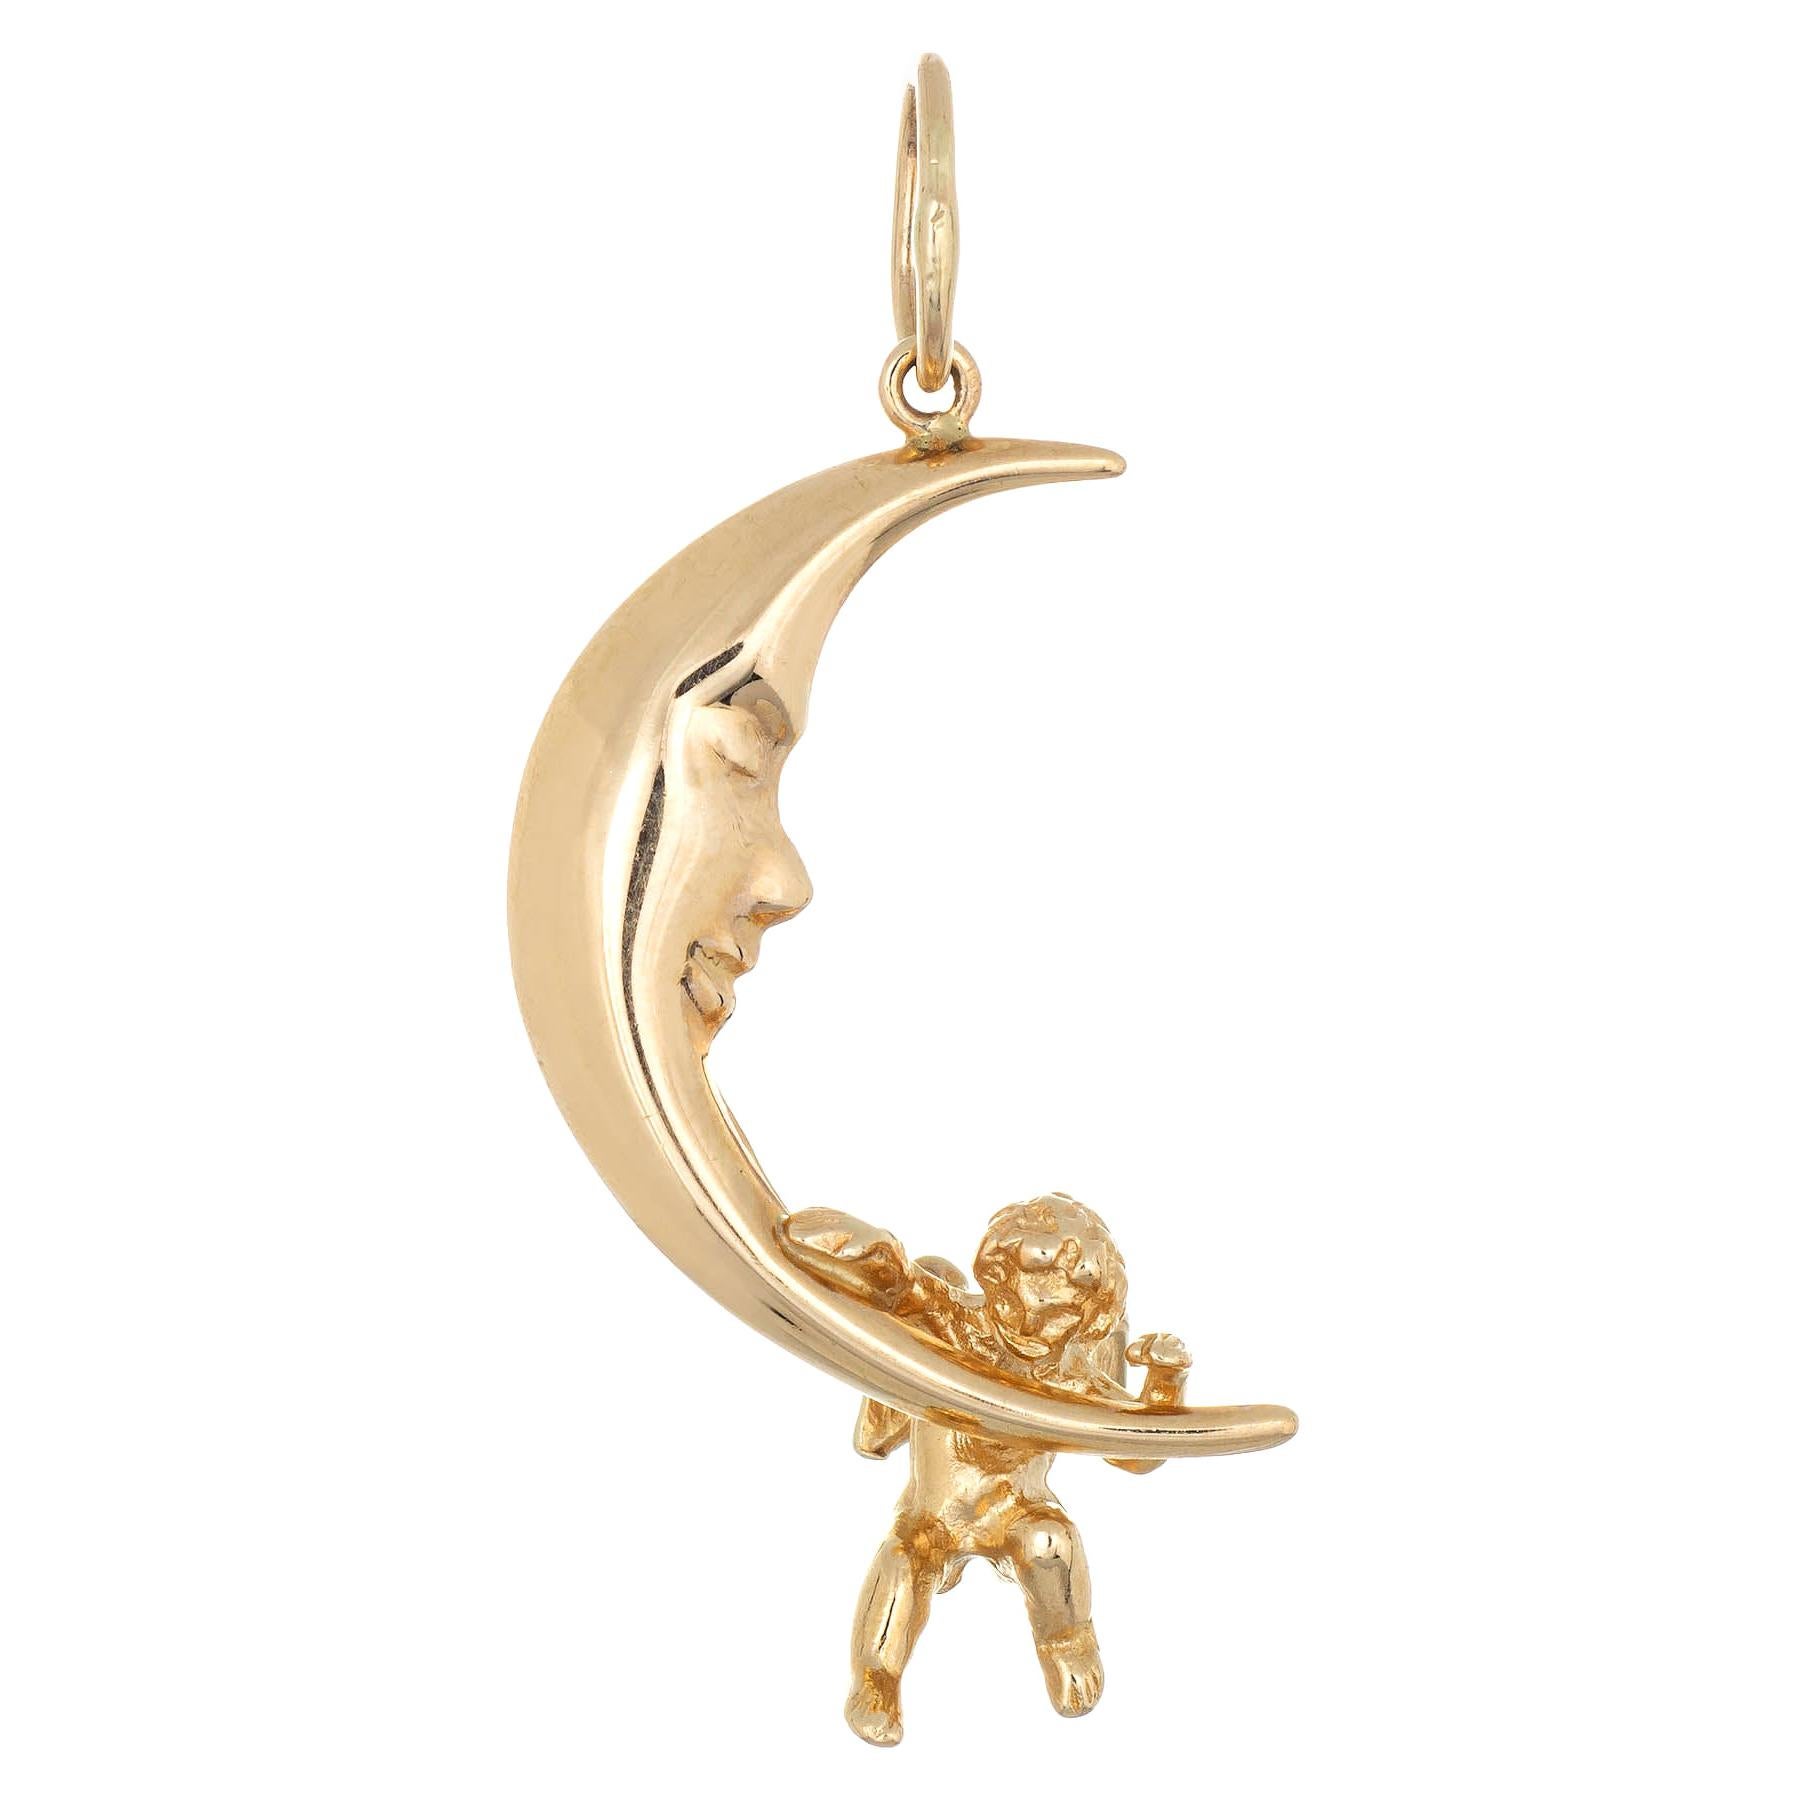 Crescent Moon Charm Estate 14k Gold Man in Moon Winged Angel Pendant Jewelry